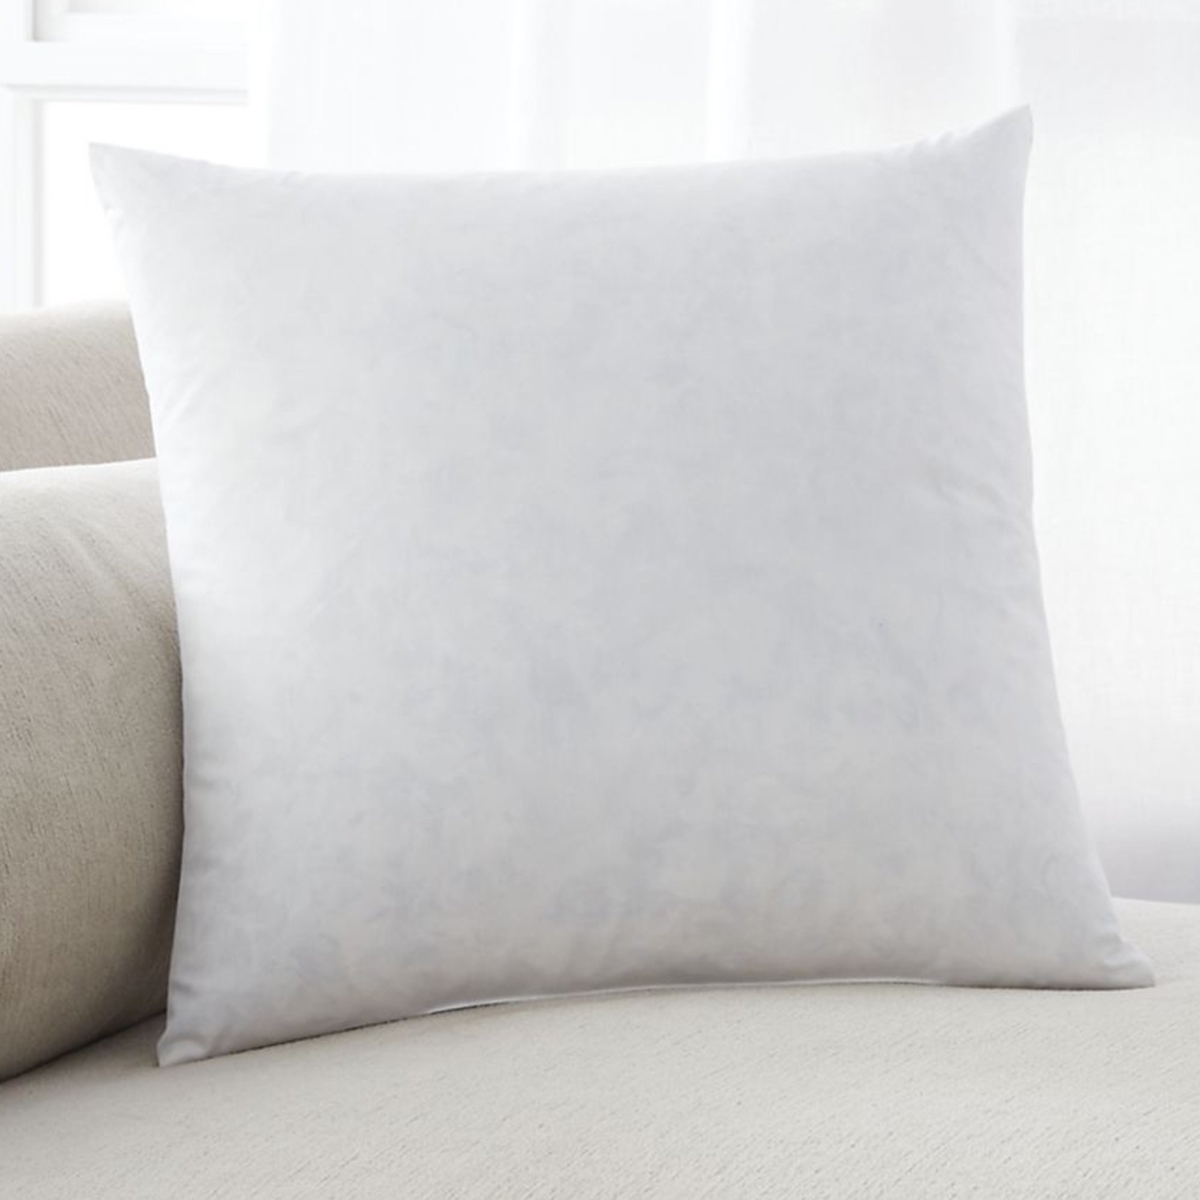 Sq-ci-fthrc-1717 16 X 16 In. Millano Feather 100 Percent Cotton Filled Cushion Insert